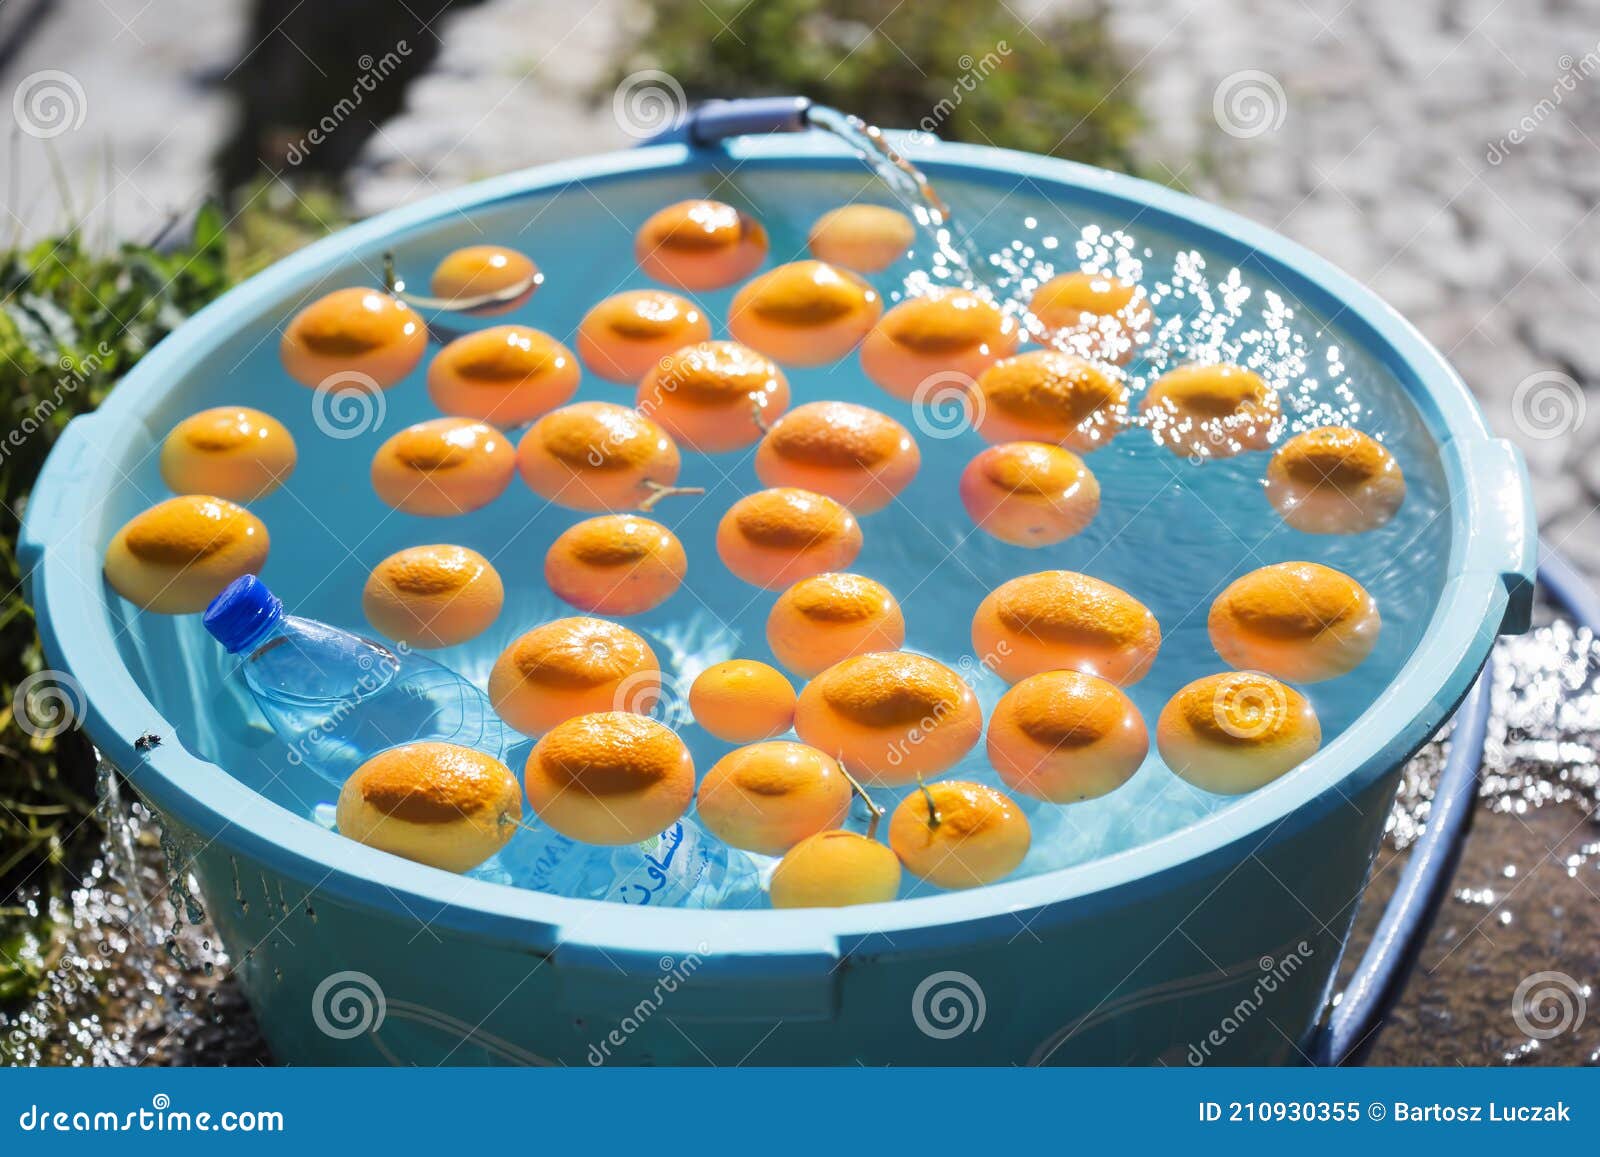 beautiful oranges cooling in bowl with water, chefchouen, morocco